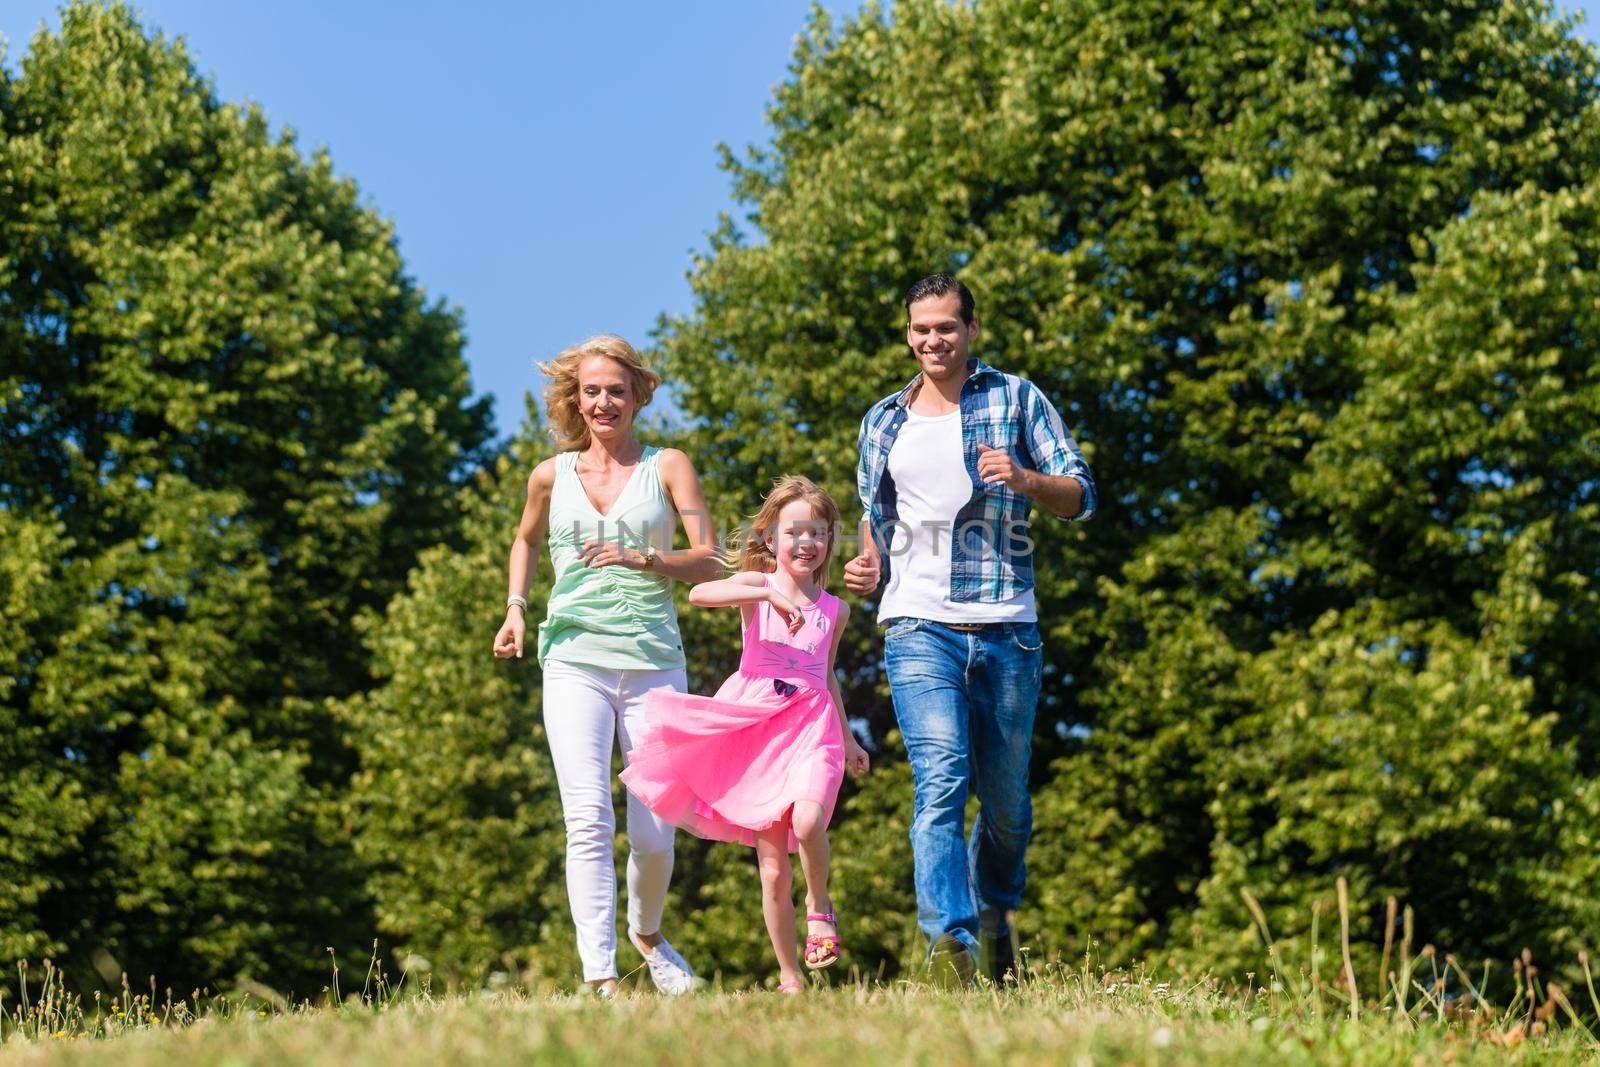 Mum, Dad and daughter running on a country lane by Kzenon